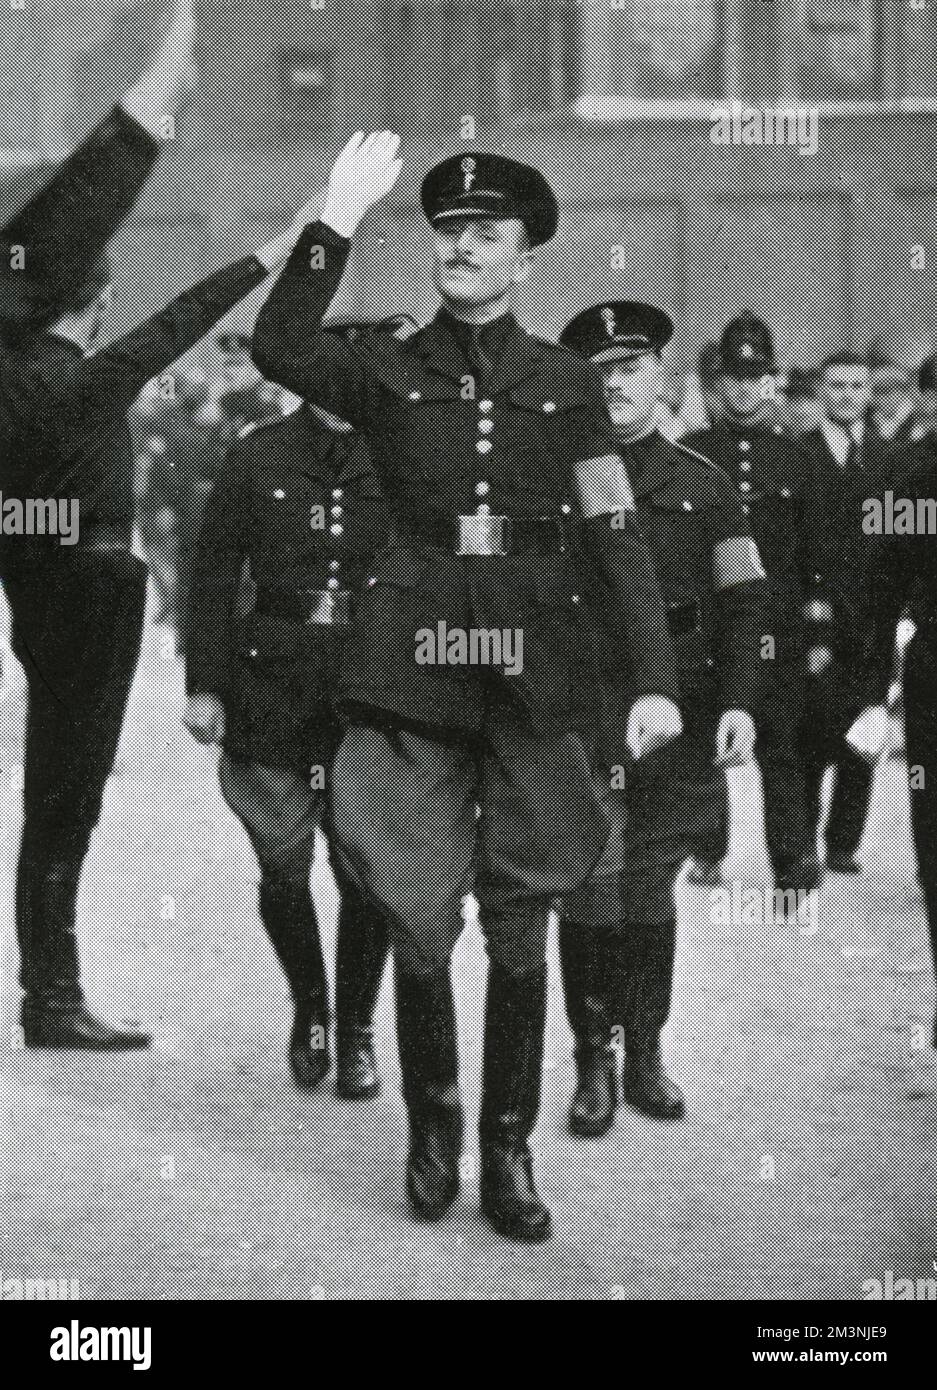 Sir Oswald Mosley arrives to review his Blackshirts, the British Union of Fascists, assembled in Royal Mint Street, before their proposed march through the East End of London. The march was diverted to avoid the enormous anti-fascist demonstration that had gathered to protest.     Date: 4 October 1936 Stock Photo